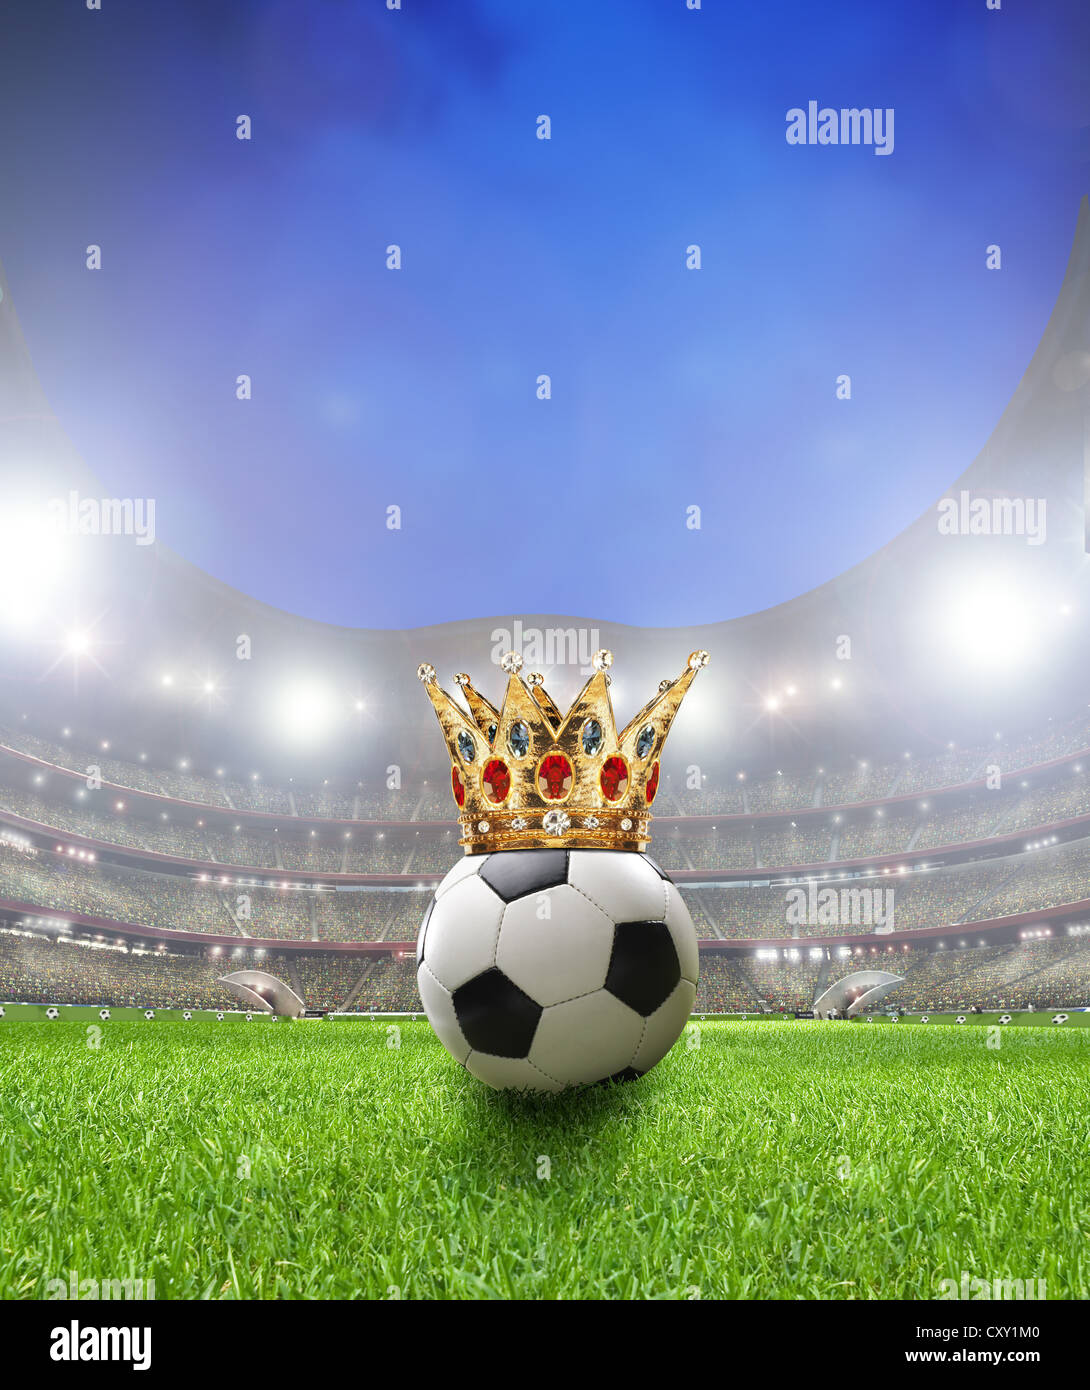 Football with a crown in a football stadium with spectator stands, illustration Stock Photo